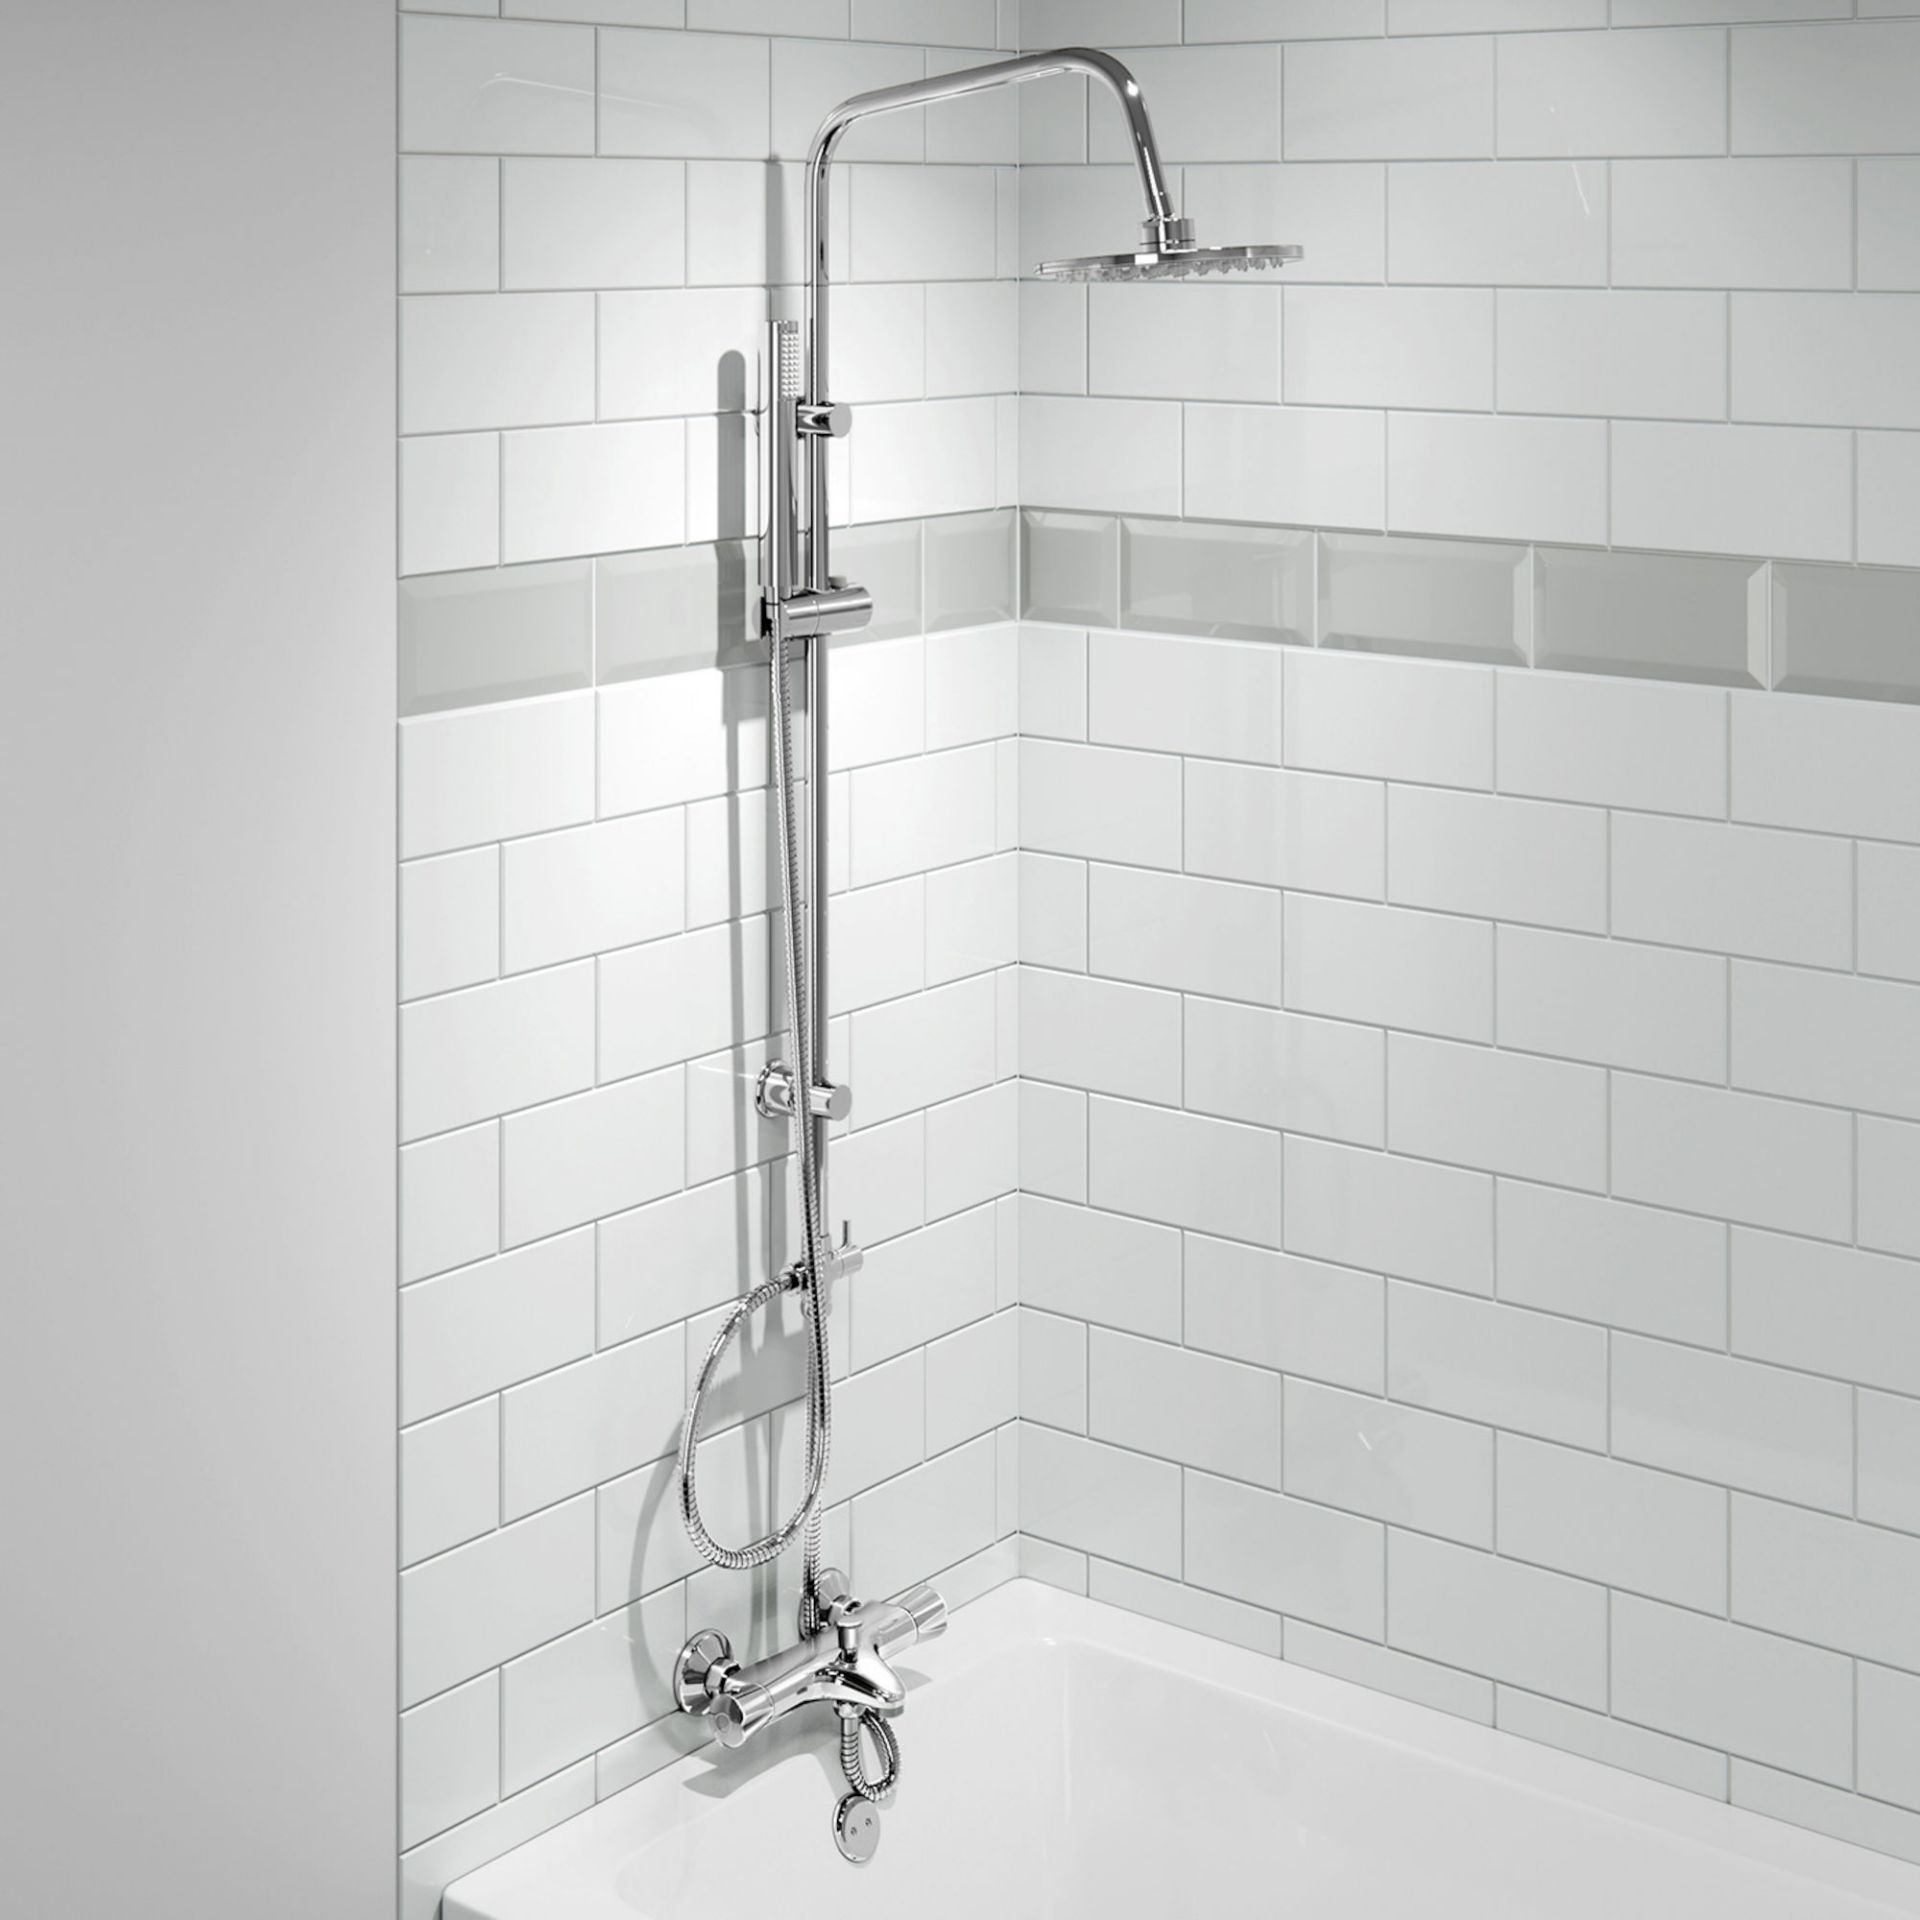 (QW169) 200mm Round Shower Kit with Thermostatic Wall Mounted Bath Filler. Fixed head for a